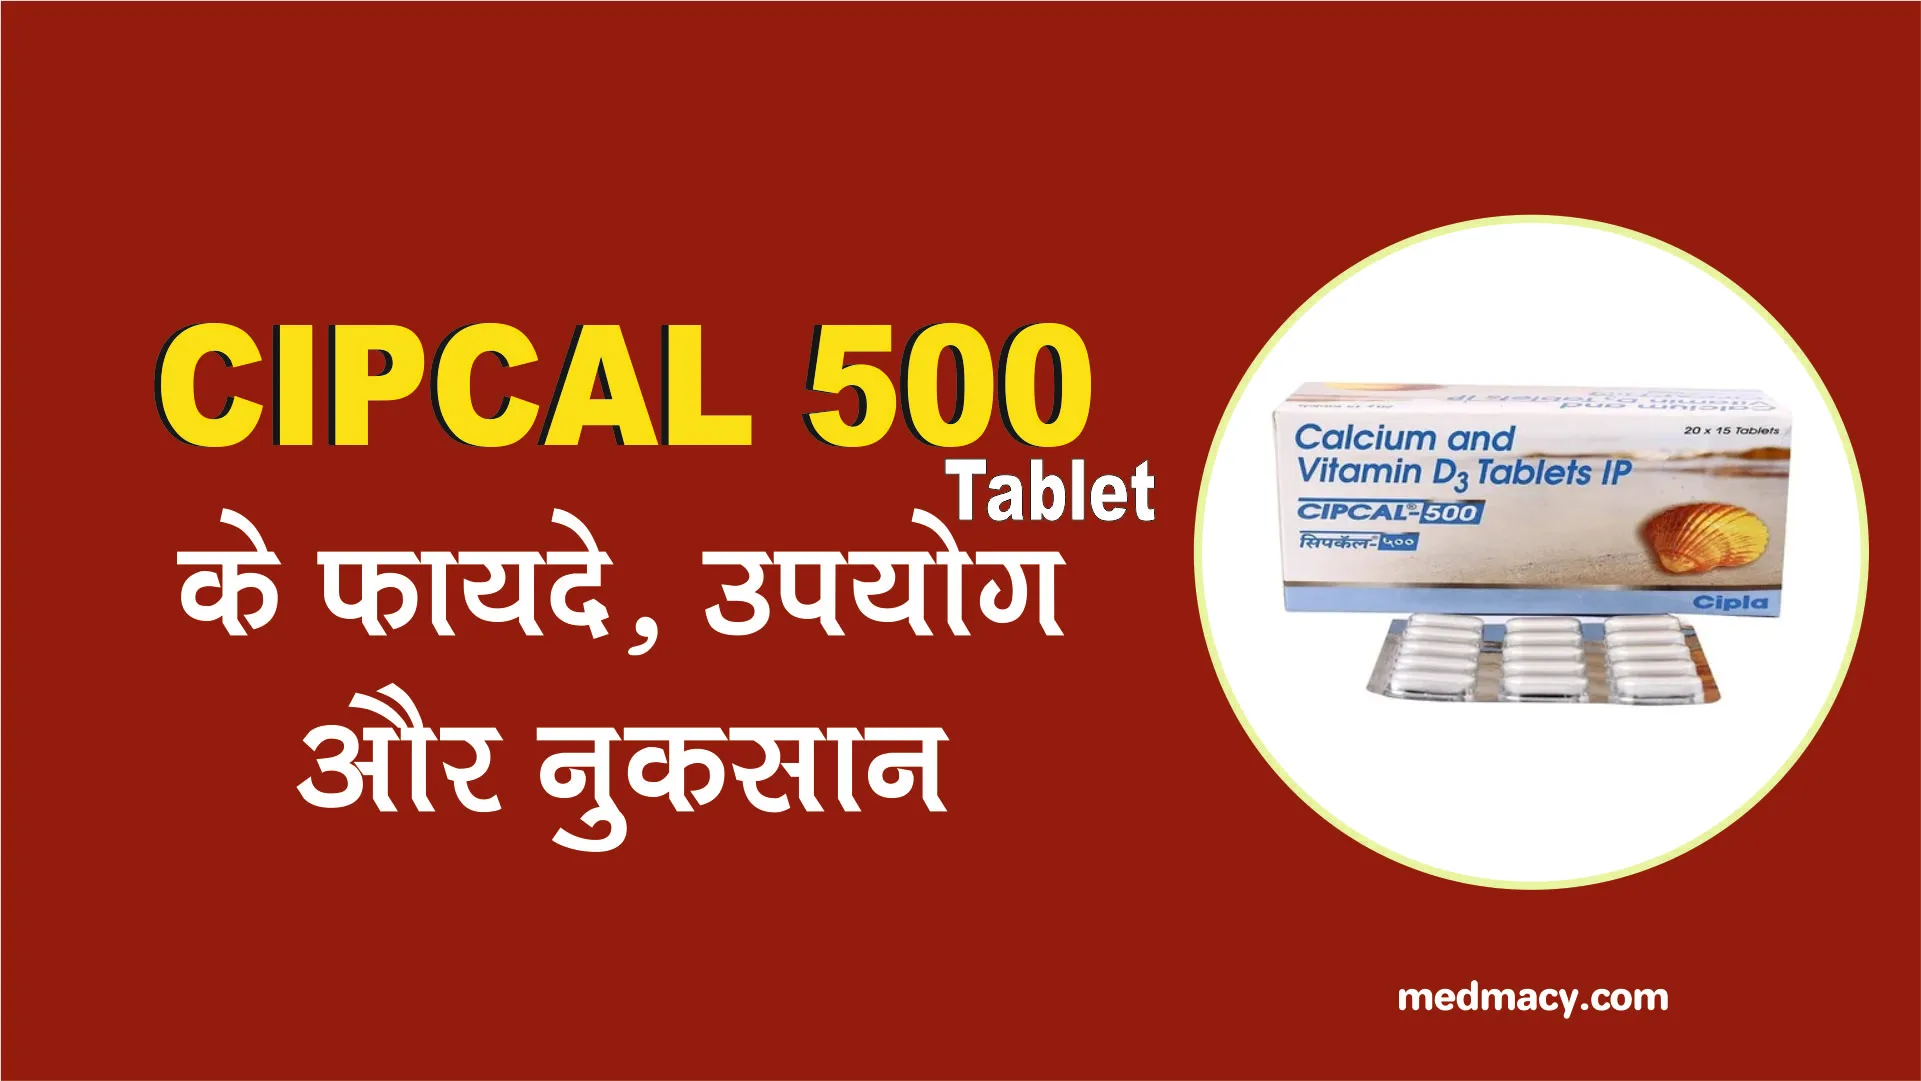 Cipcal 500 Tablet Uses in Hindi